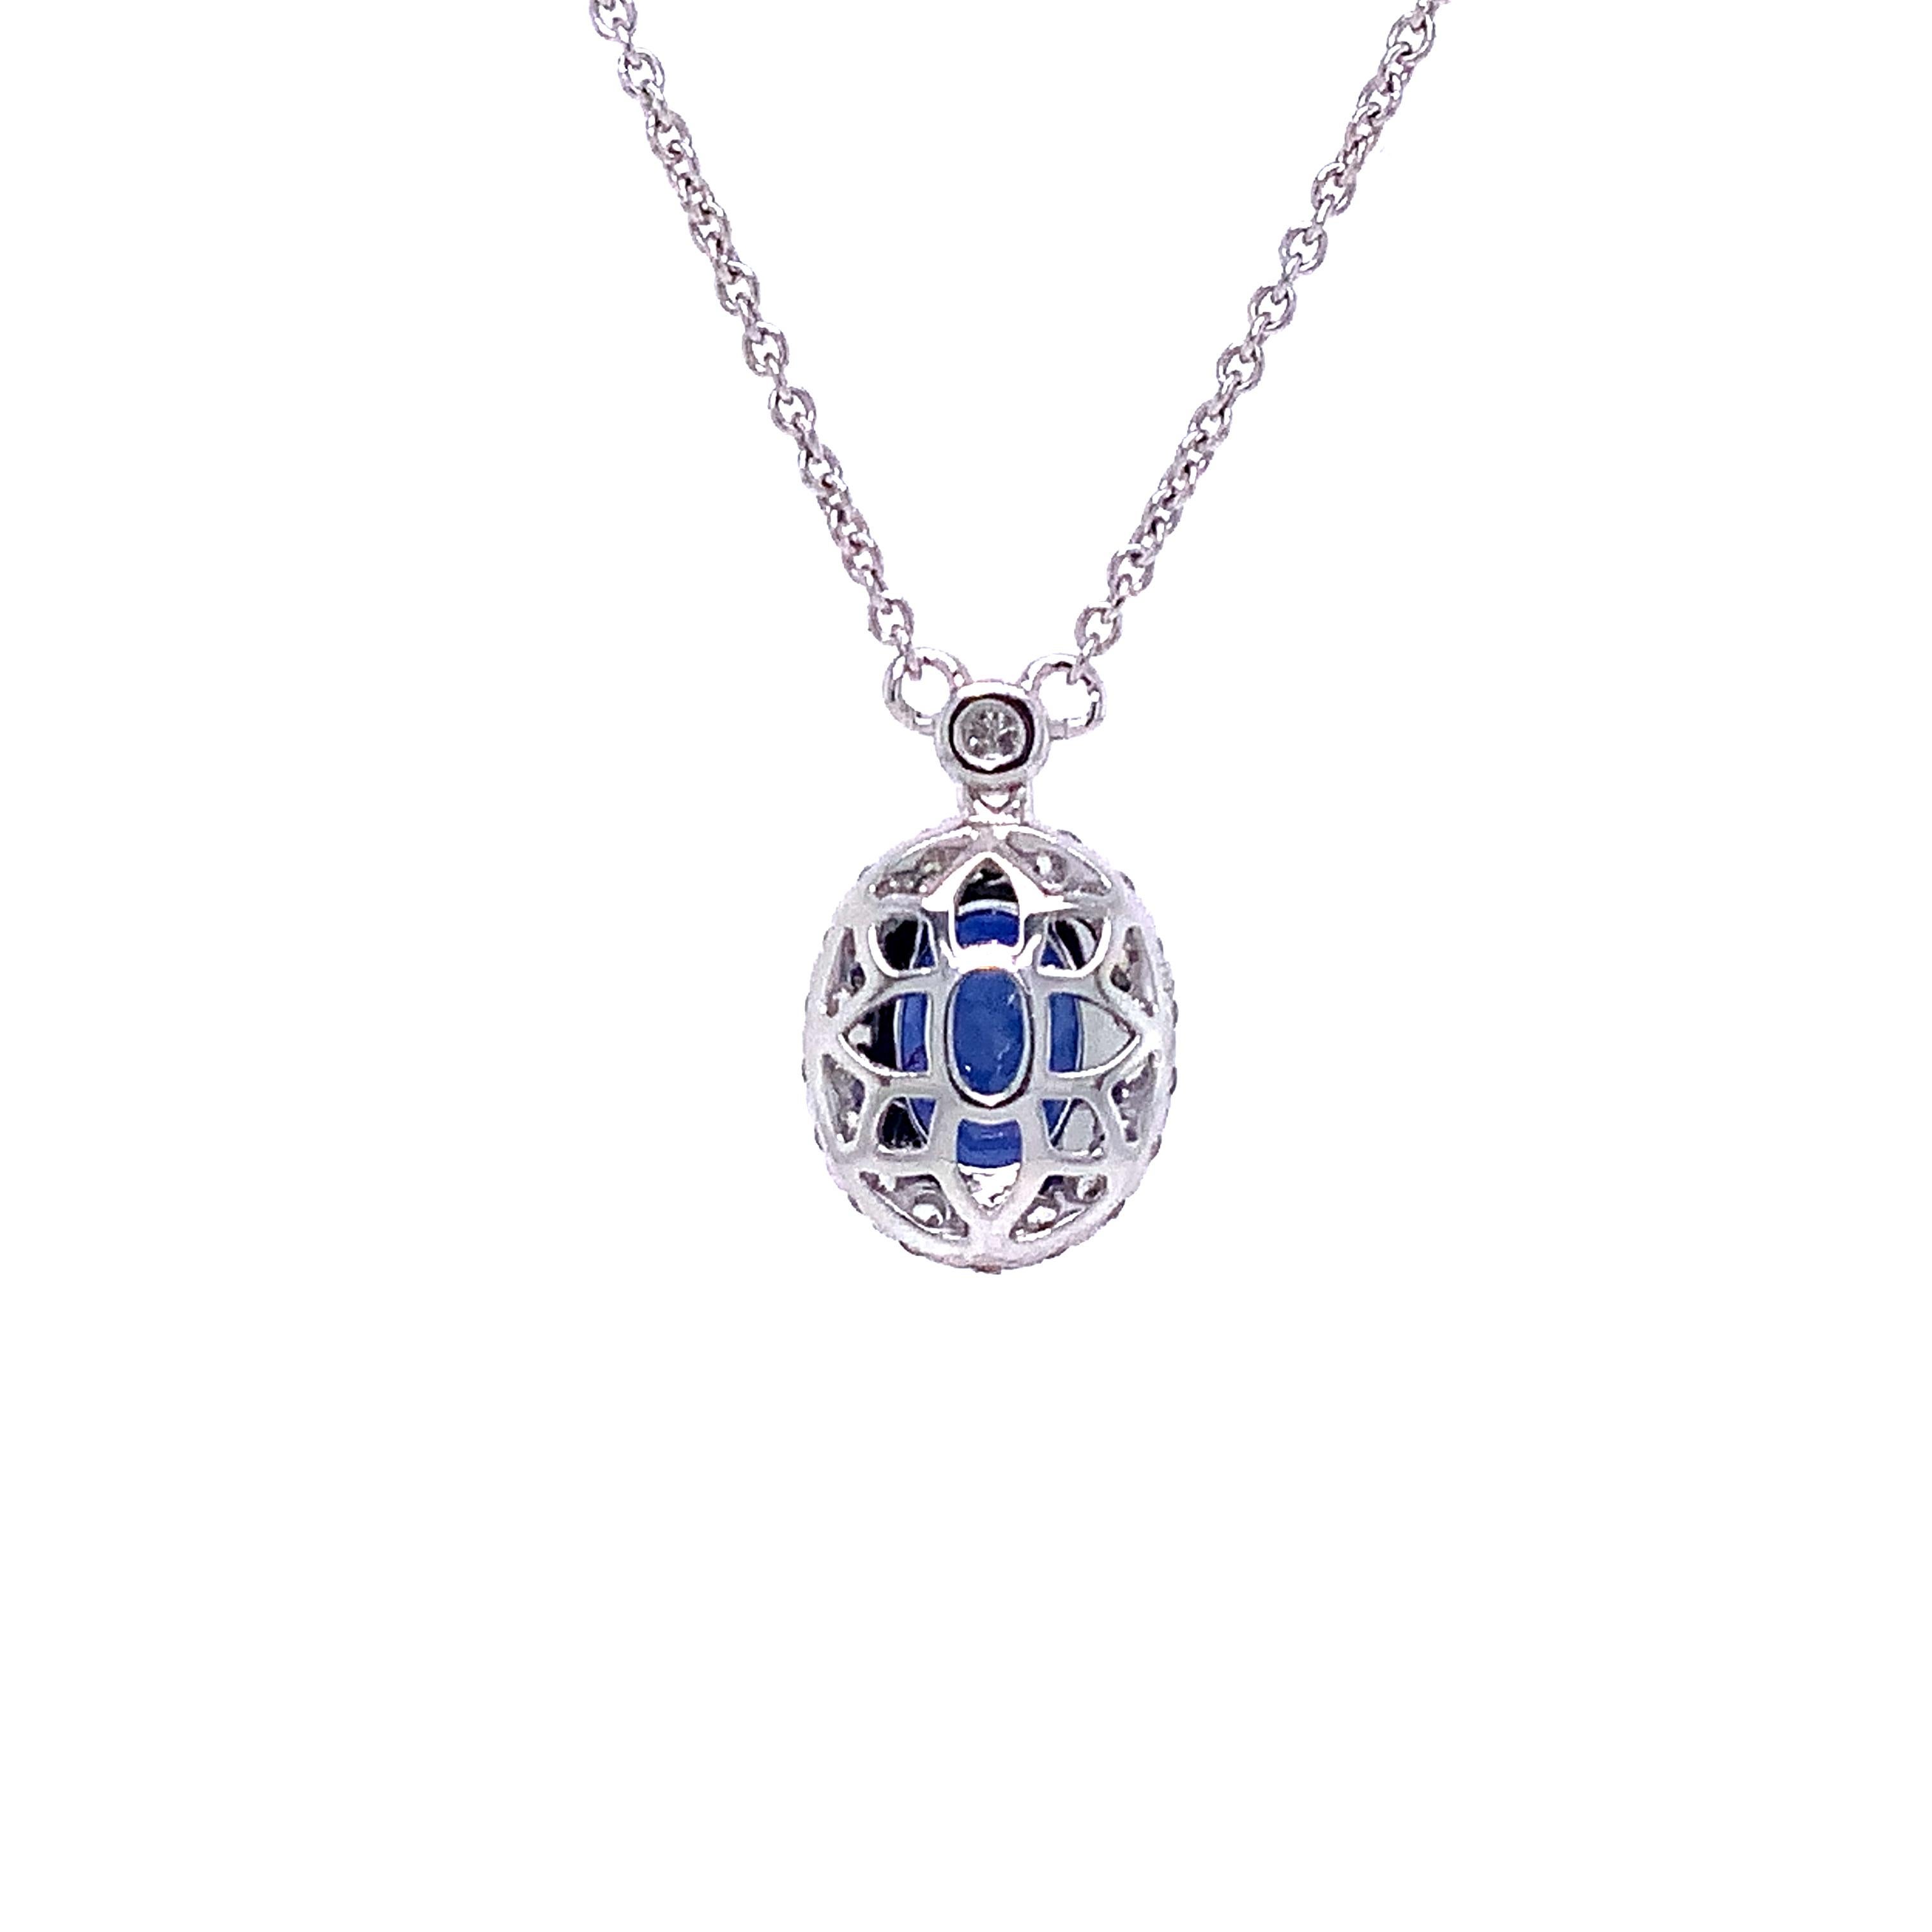 Brilliant Cut Roman + Jules GIA Certified Blue Sapphire and Diamond Necklace Set in 18k W/G For Sale